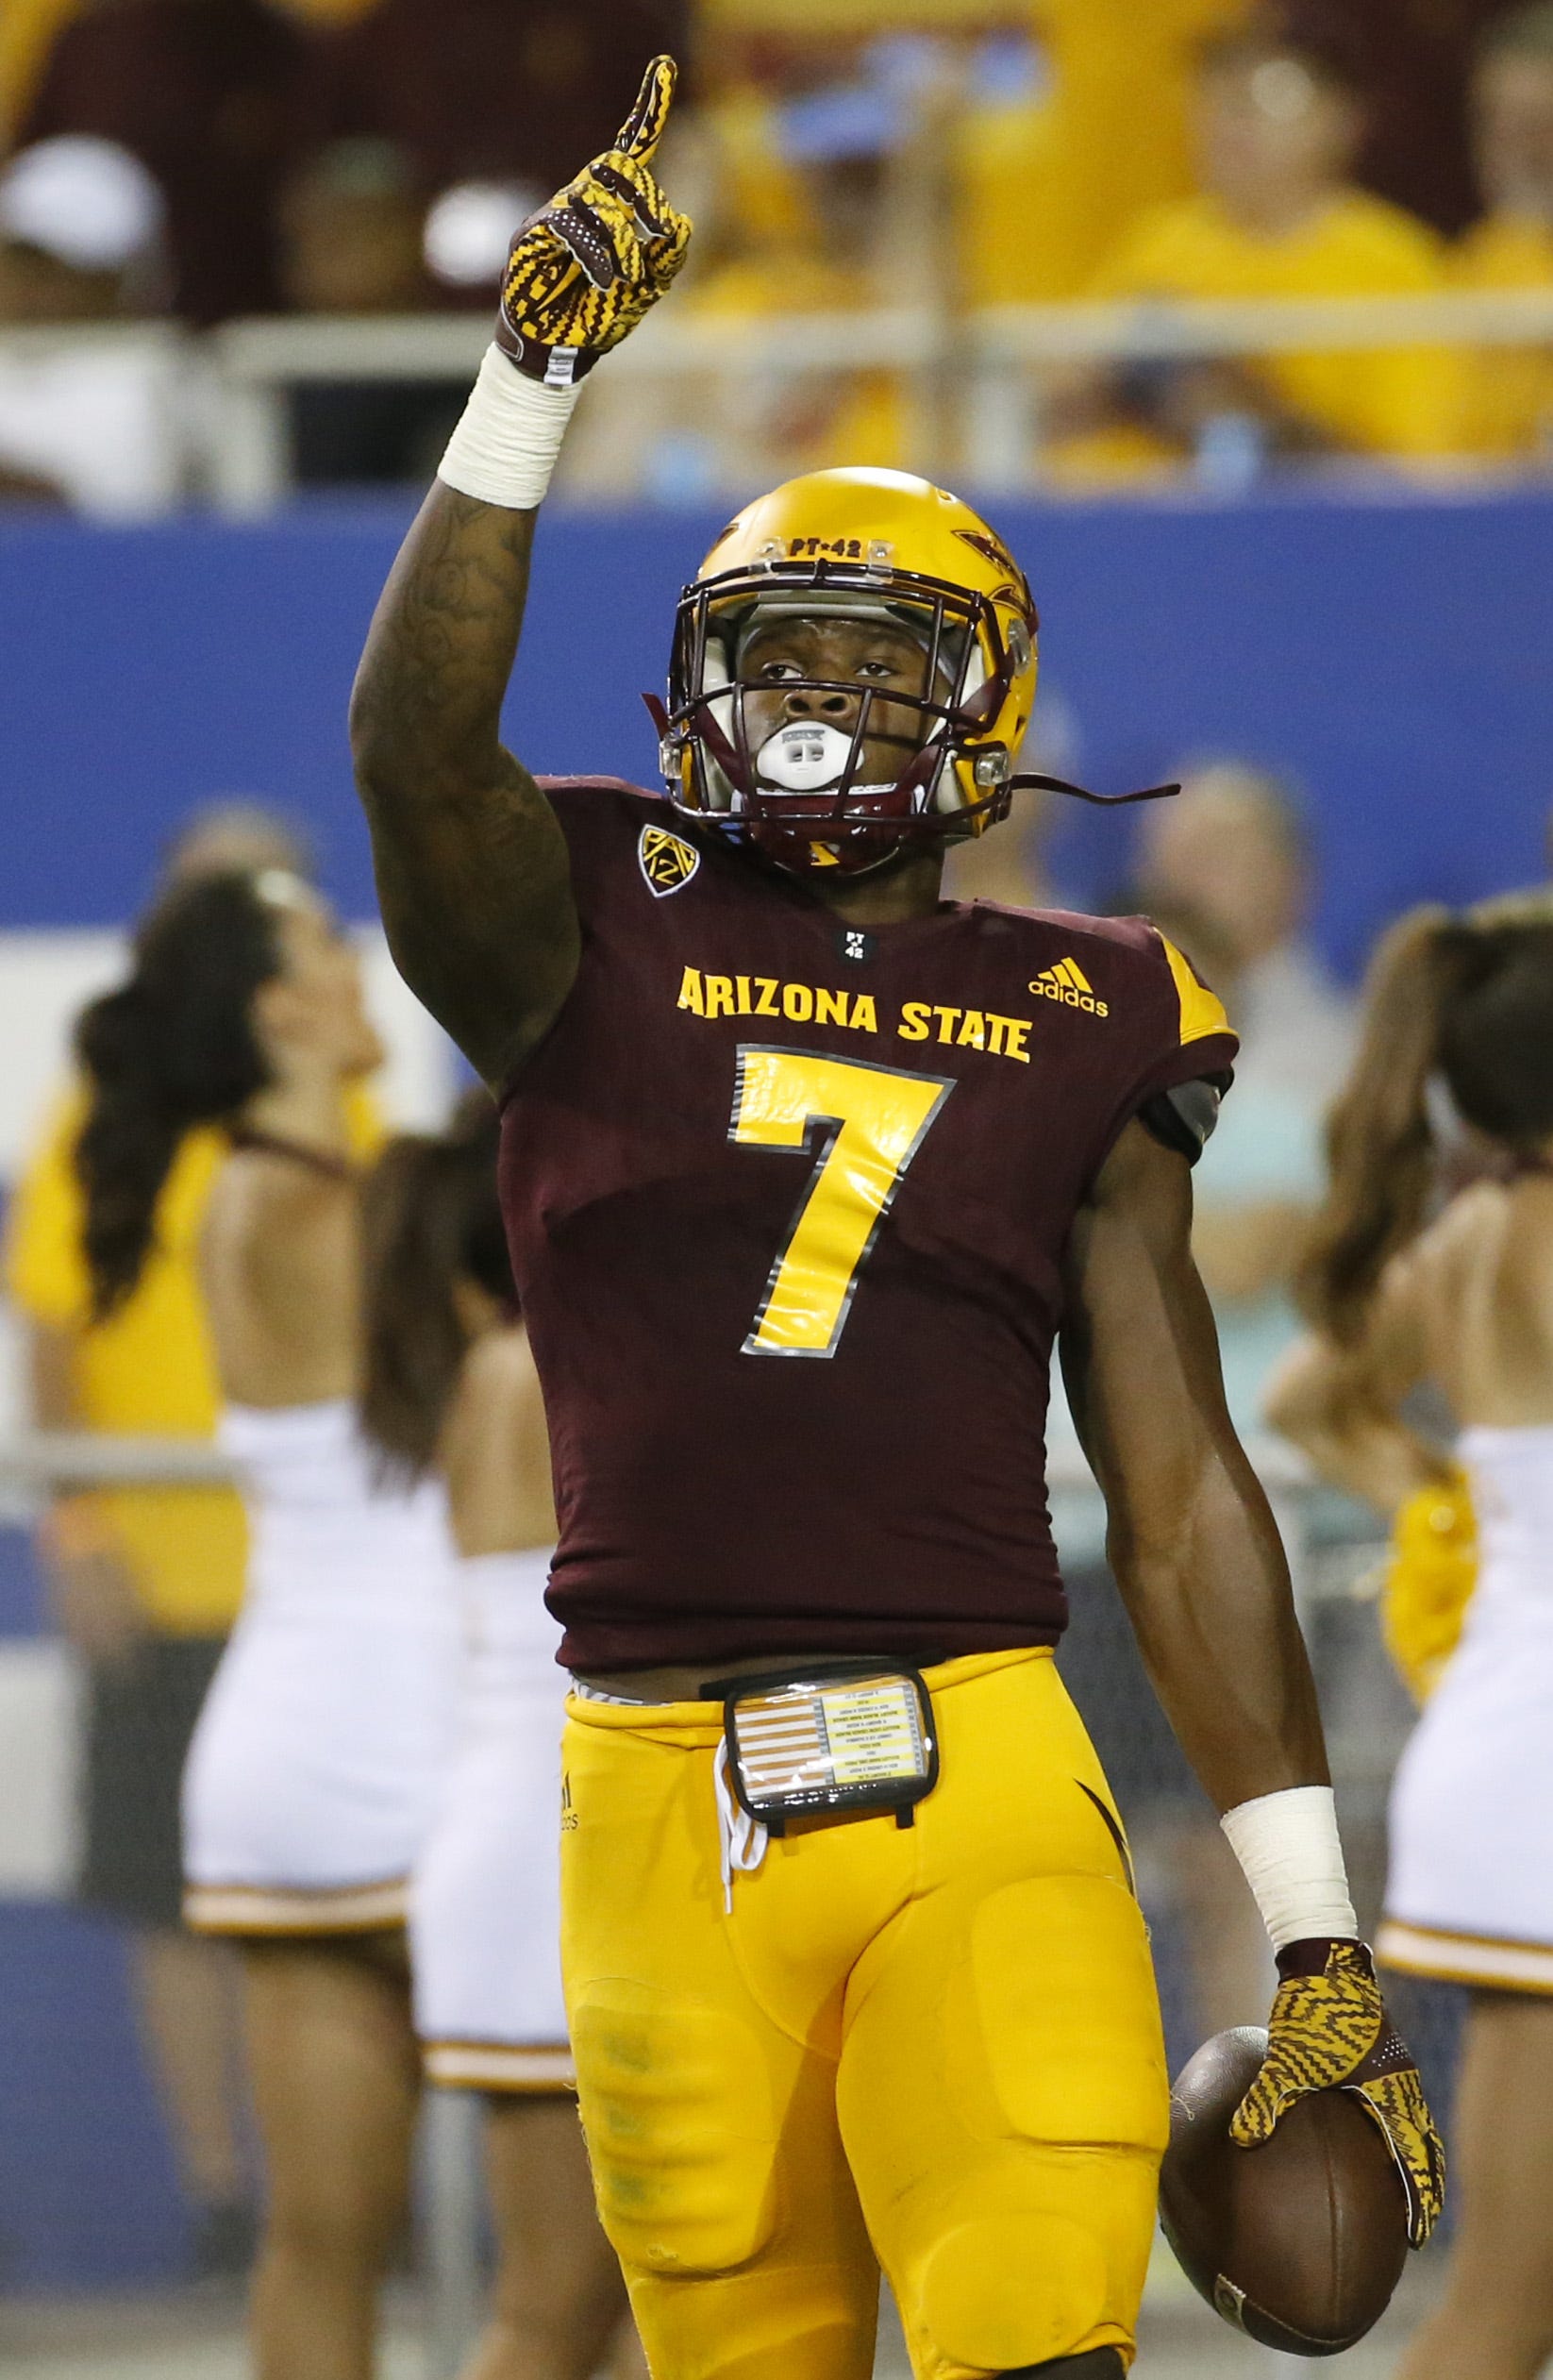 ASU uniforms to primarily be maroon and gold Willie's Blog